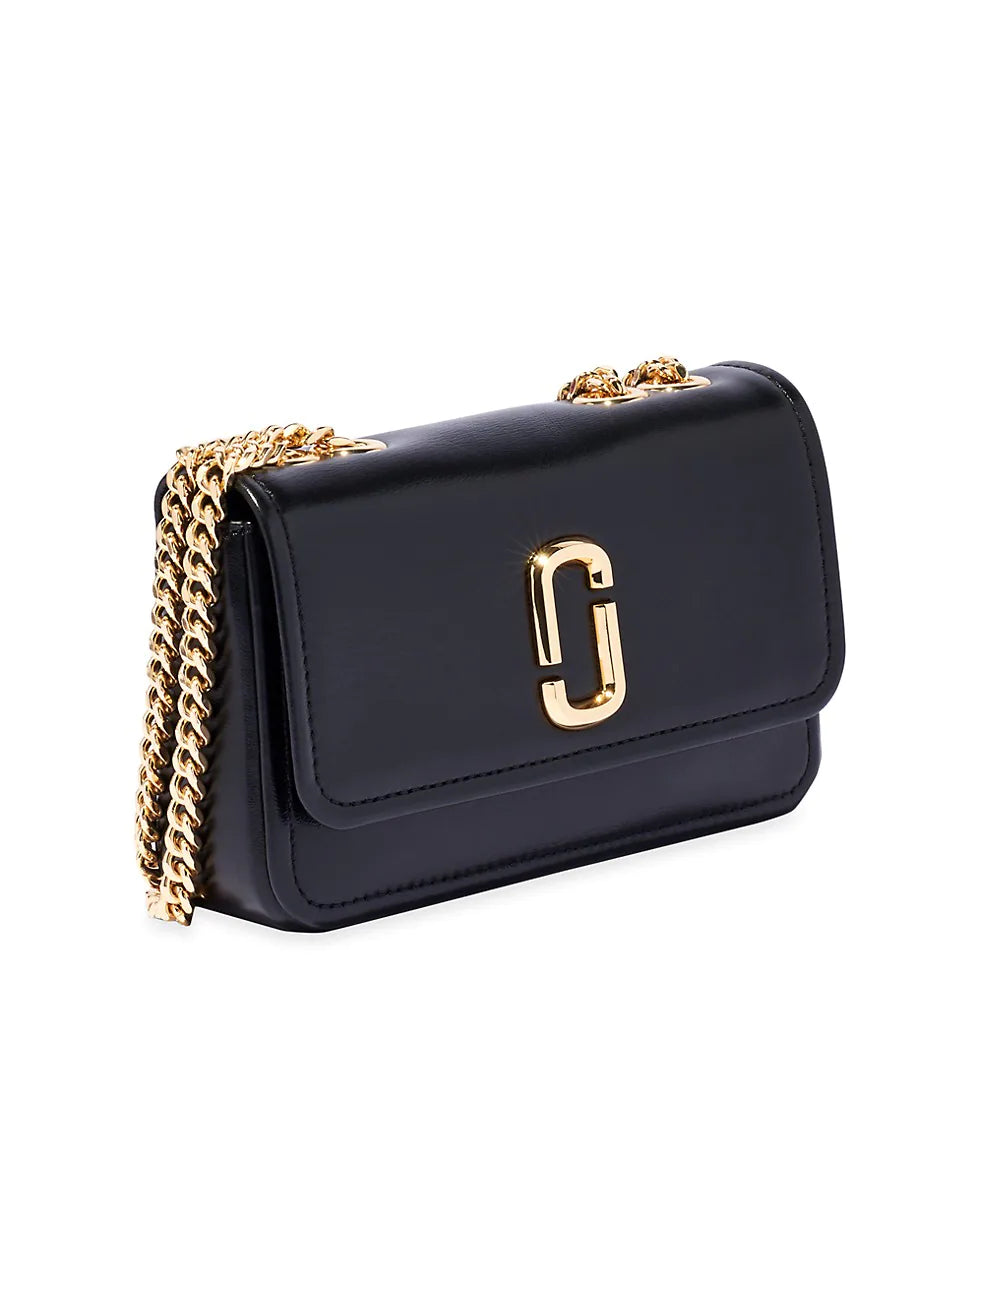 Marc Jacobs Black Snapshot Leather Crossbody Bag, Best Price and Reviews